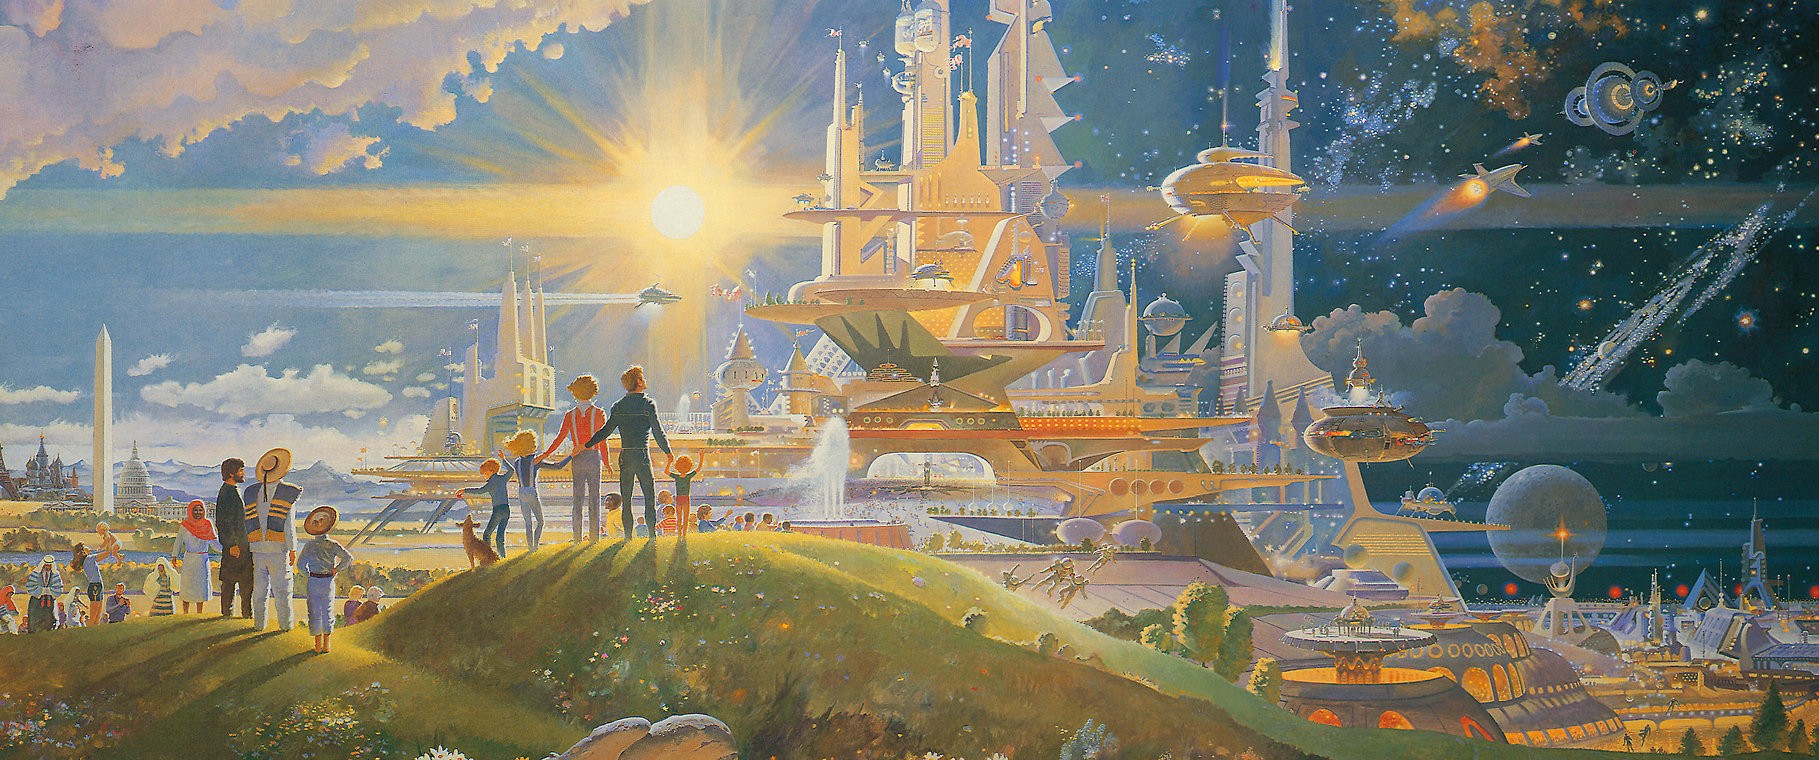    Robert McCall, “The Prologue and the Promise”   